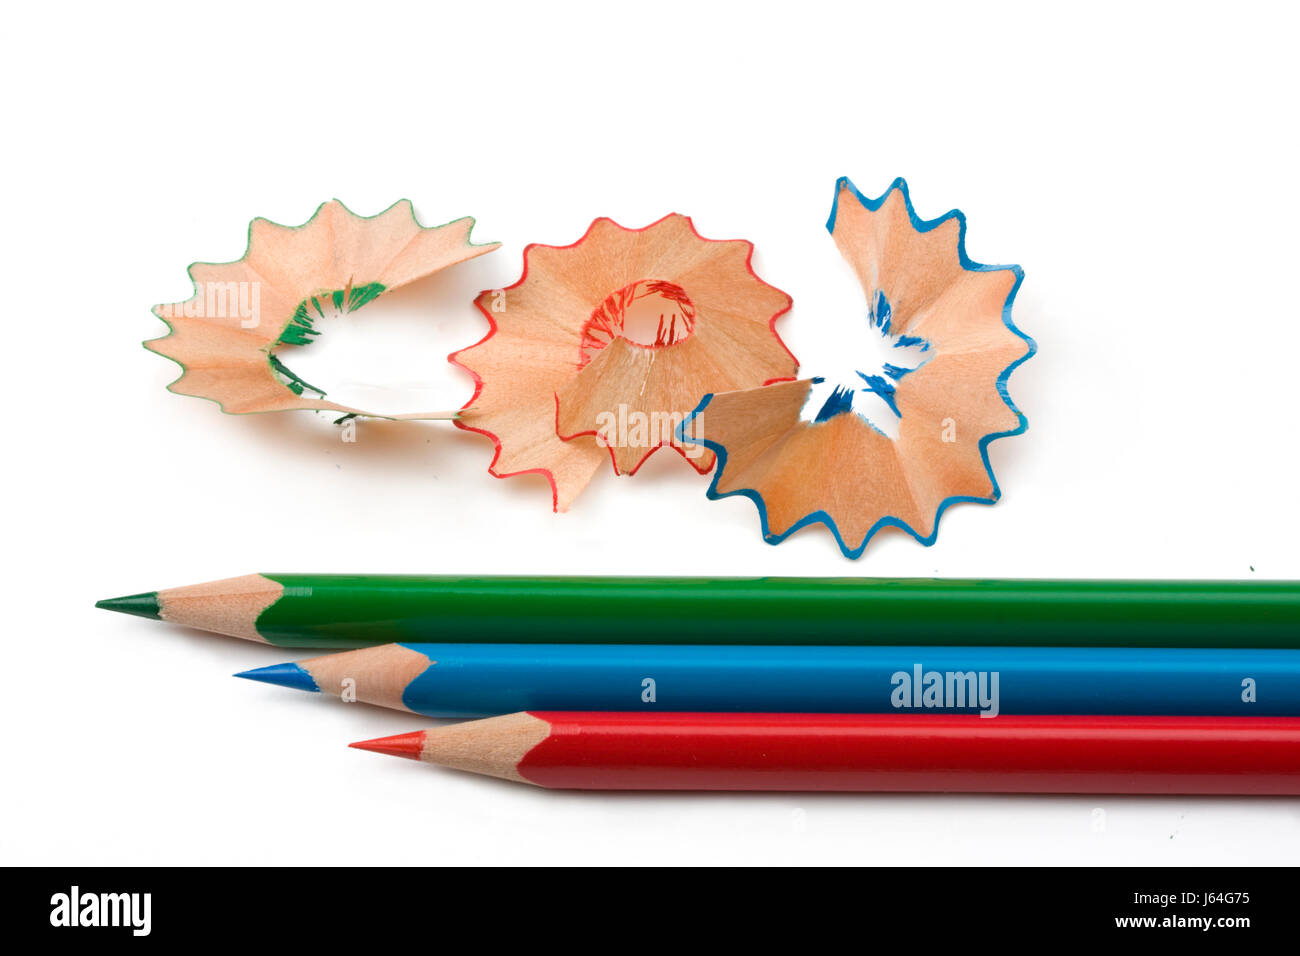 wood chippings and colored pens Stock Photo